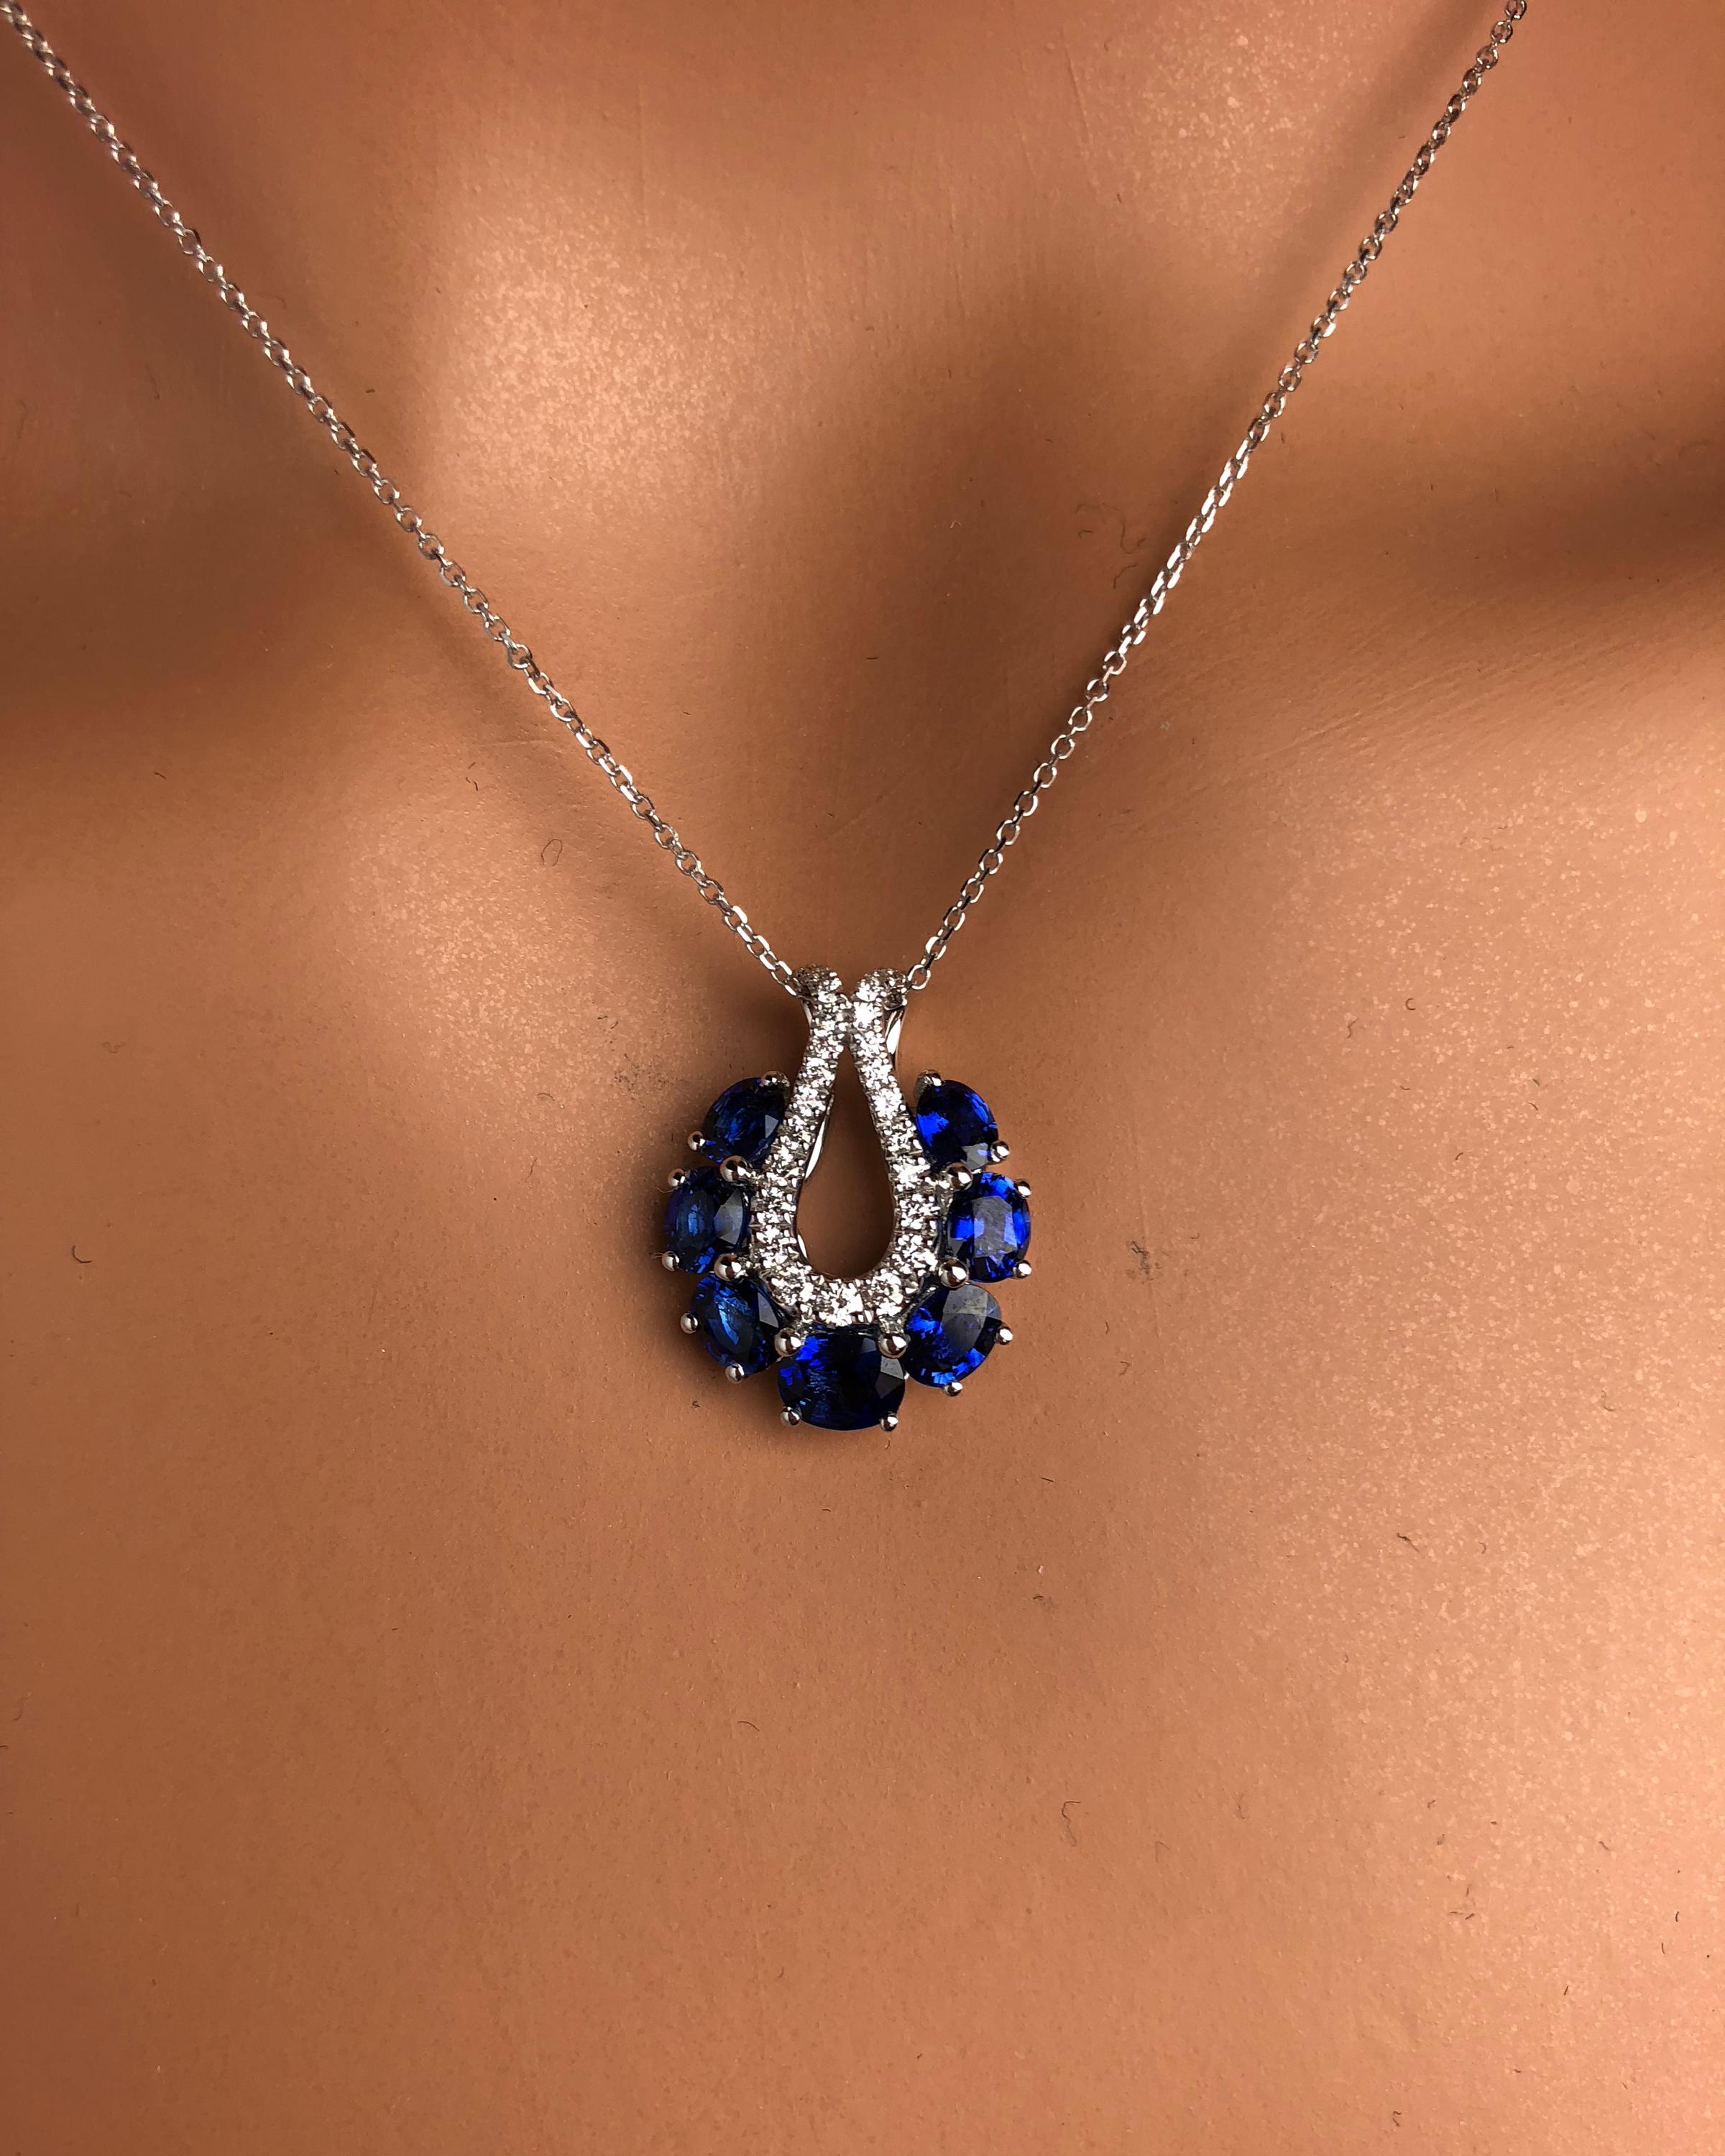 This lovely halo pendant features seven oval cut blue Sapphires, total 2.01 carats, encircling an open teardrop setting of round white diamonds.

Center: 2.08 carats blue sapphire
Diamond Halo: 25 round diamonds total 0.25 carats
Set in 18k White